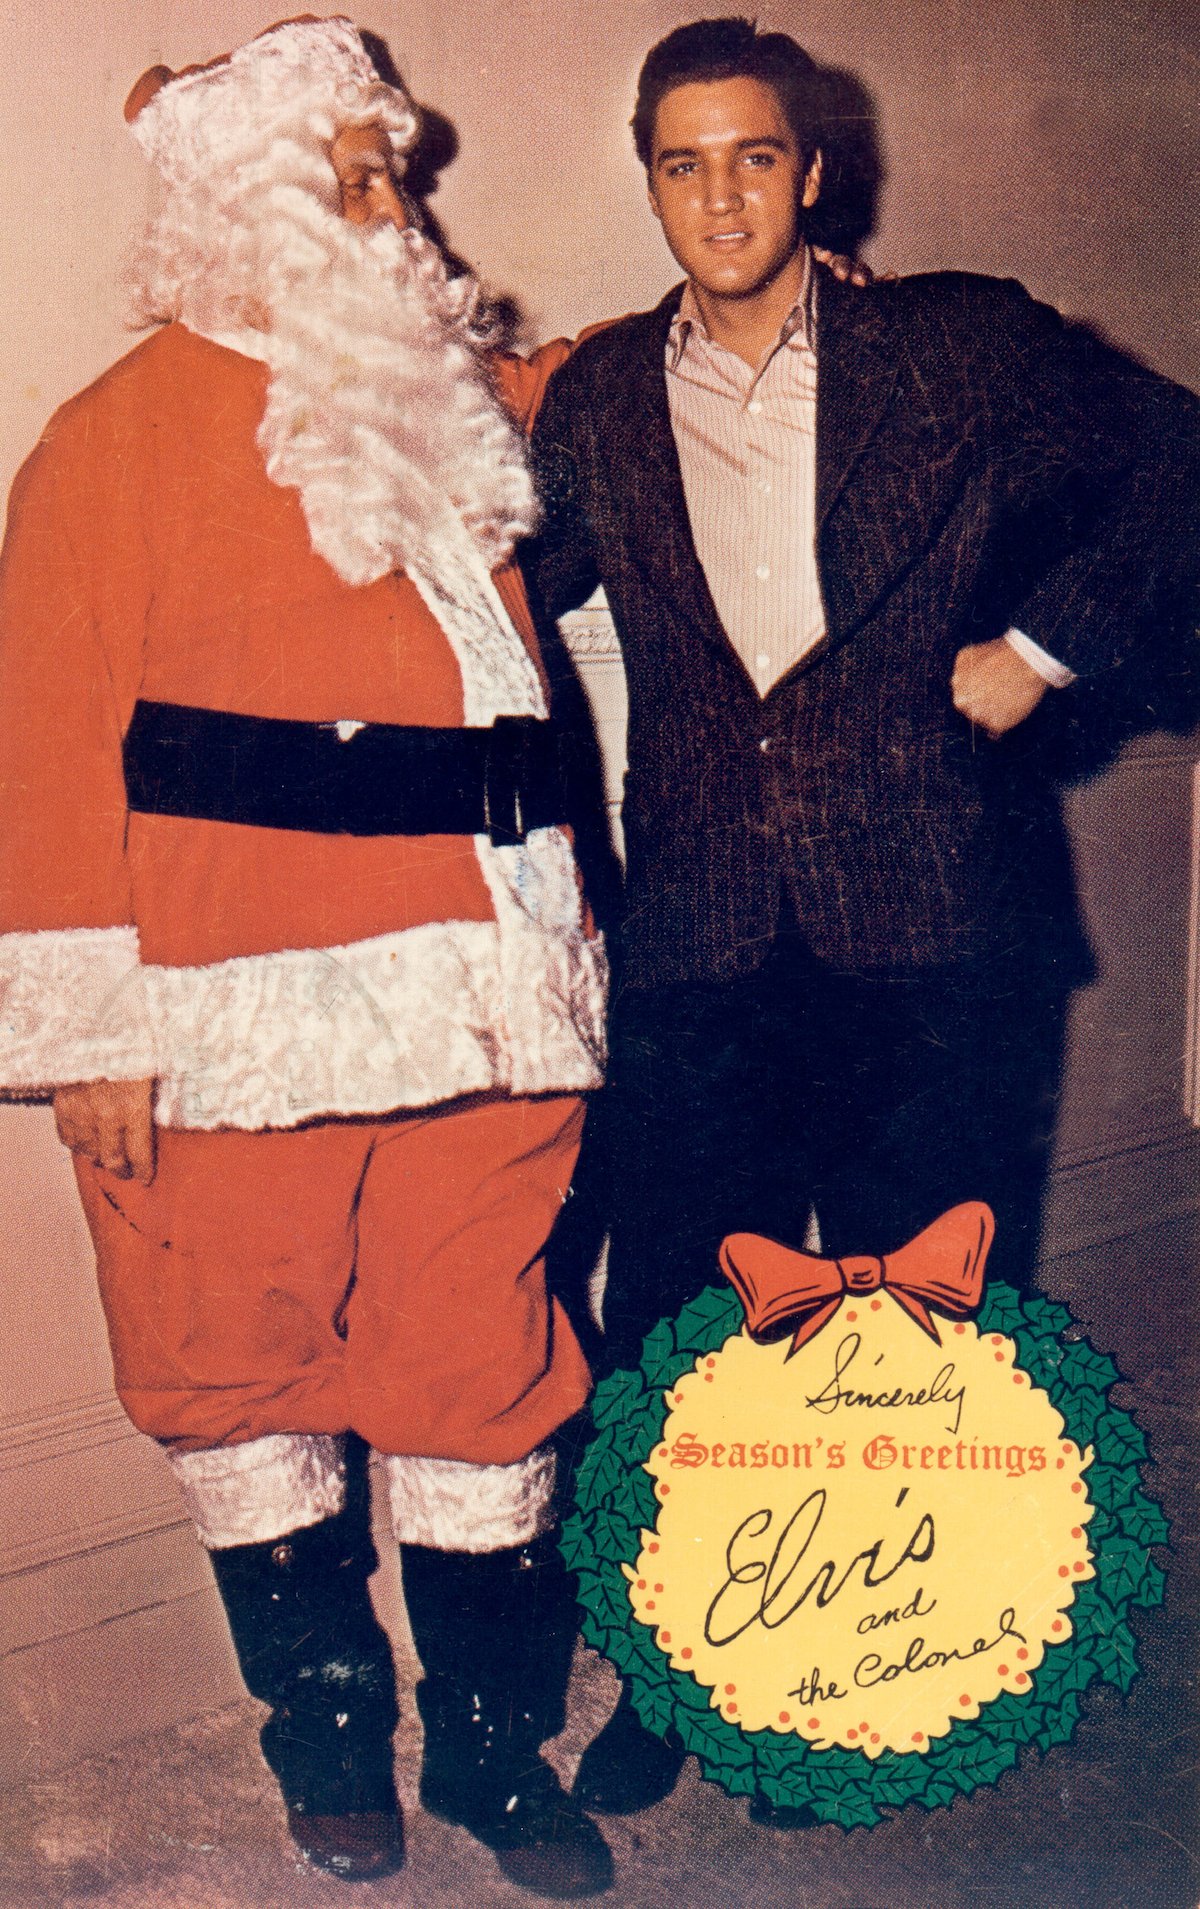 Elvis poses with Colonel Tom Parker as Santa